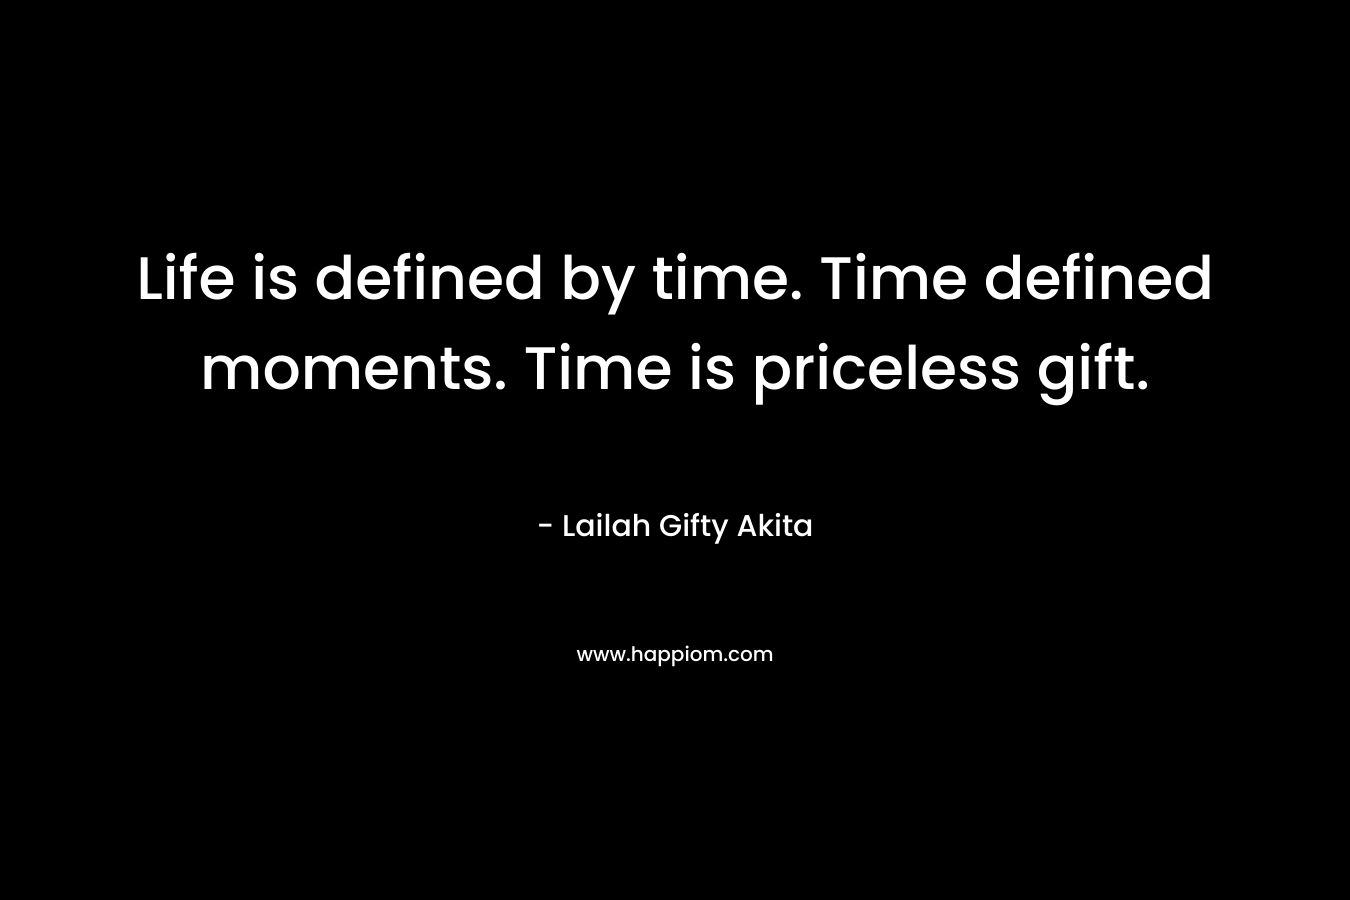 Life is defined by time. Time defined moments. Time is priceless gift.